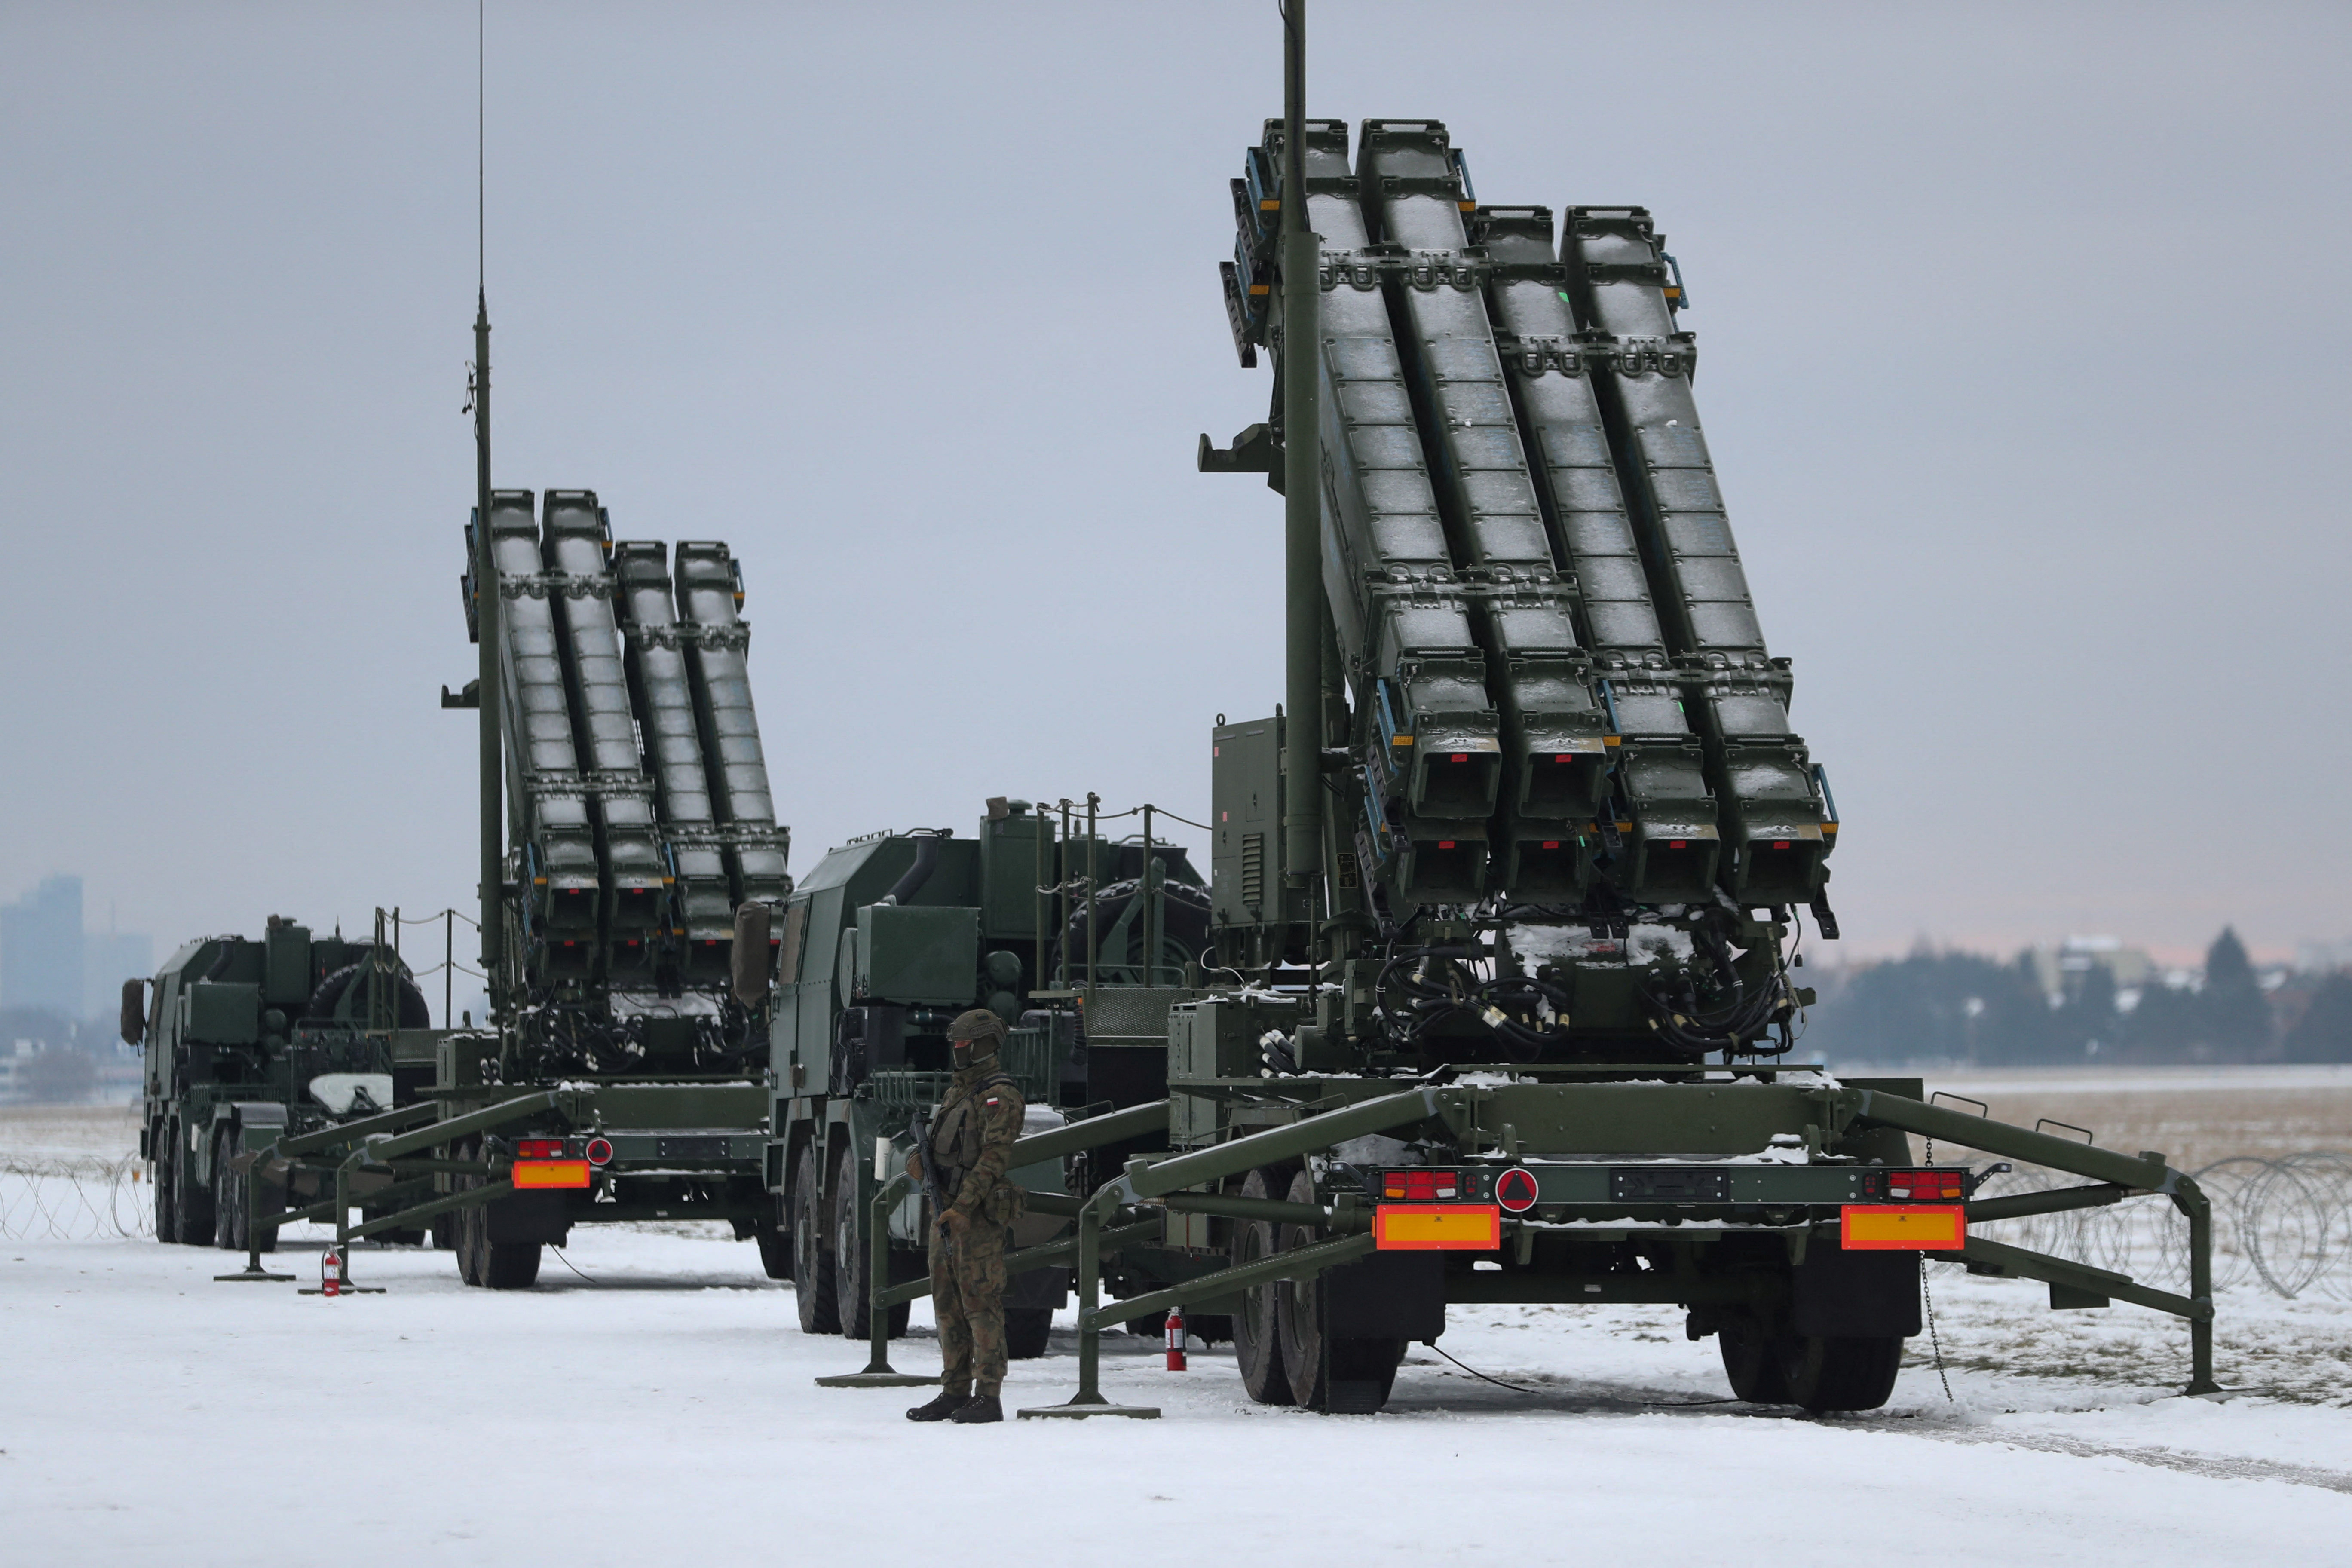 Patriot missile defense system in Ukraine likely damaged, US officials say  | Reuters